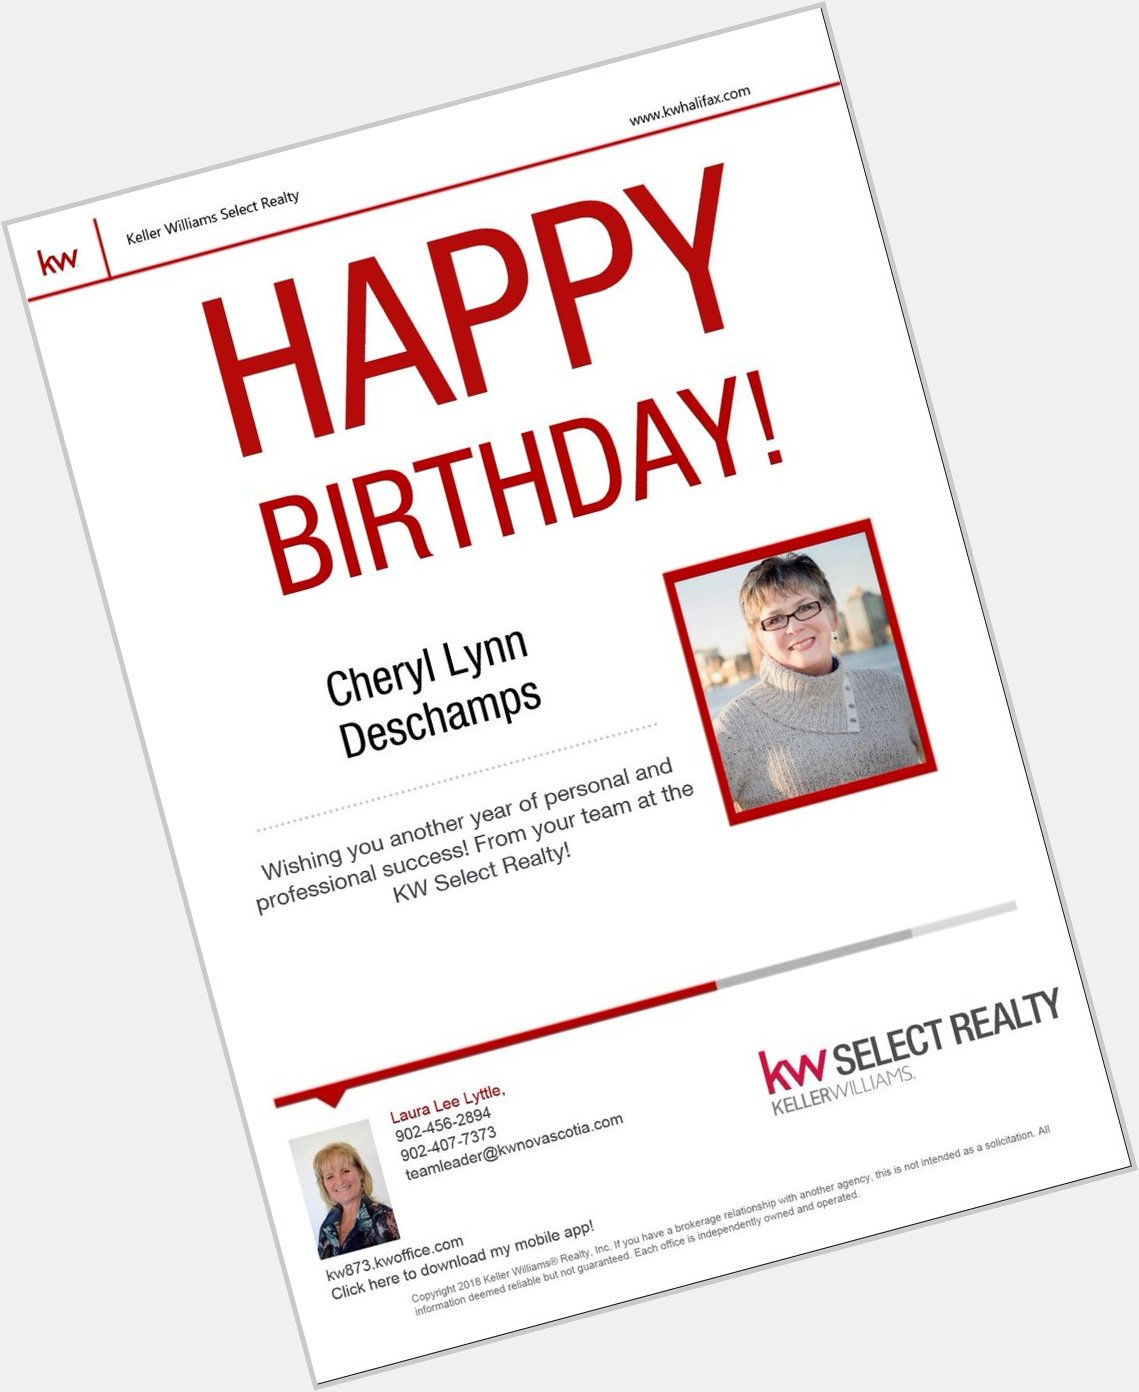 Wishing Cheryl Lynn a Very Happy Birthday today! We hope you have a great day! 